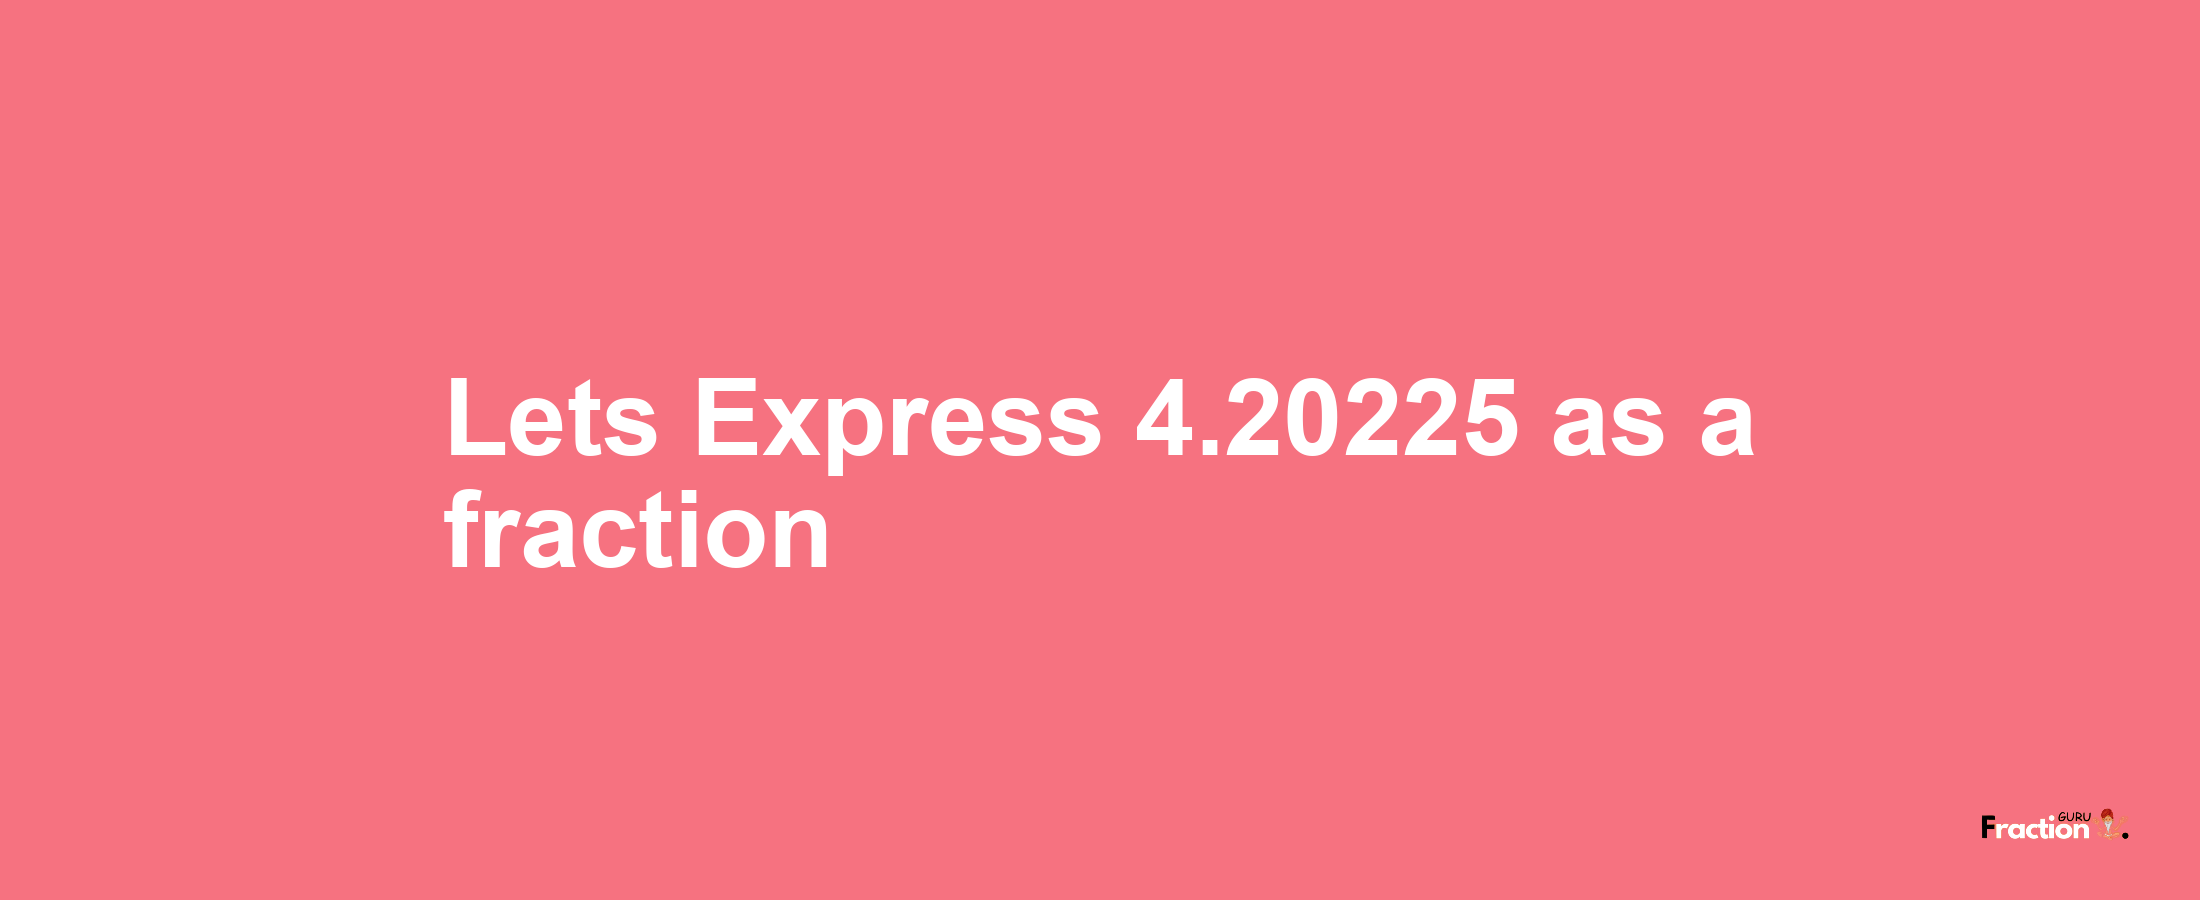 Lets Express 4.20225 as afraction